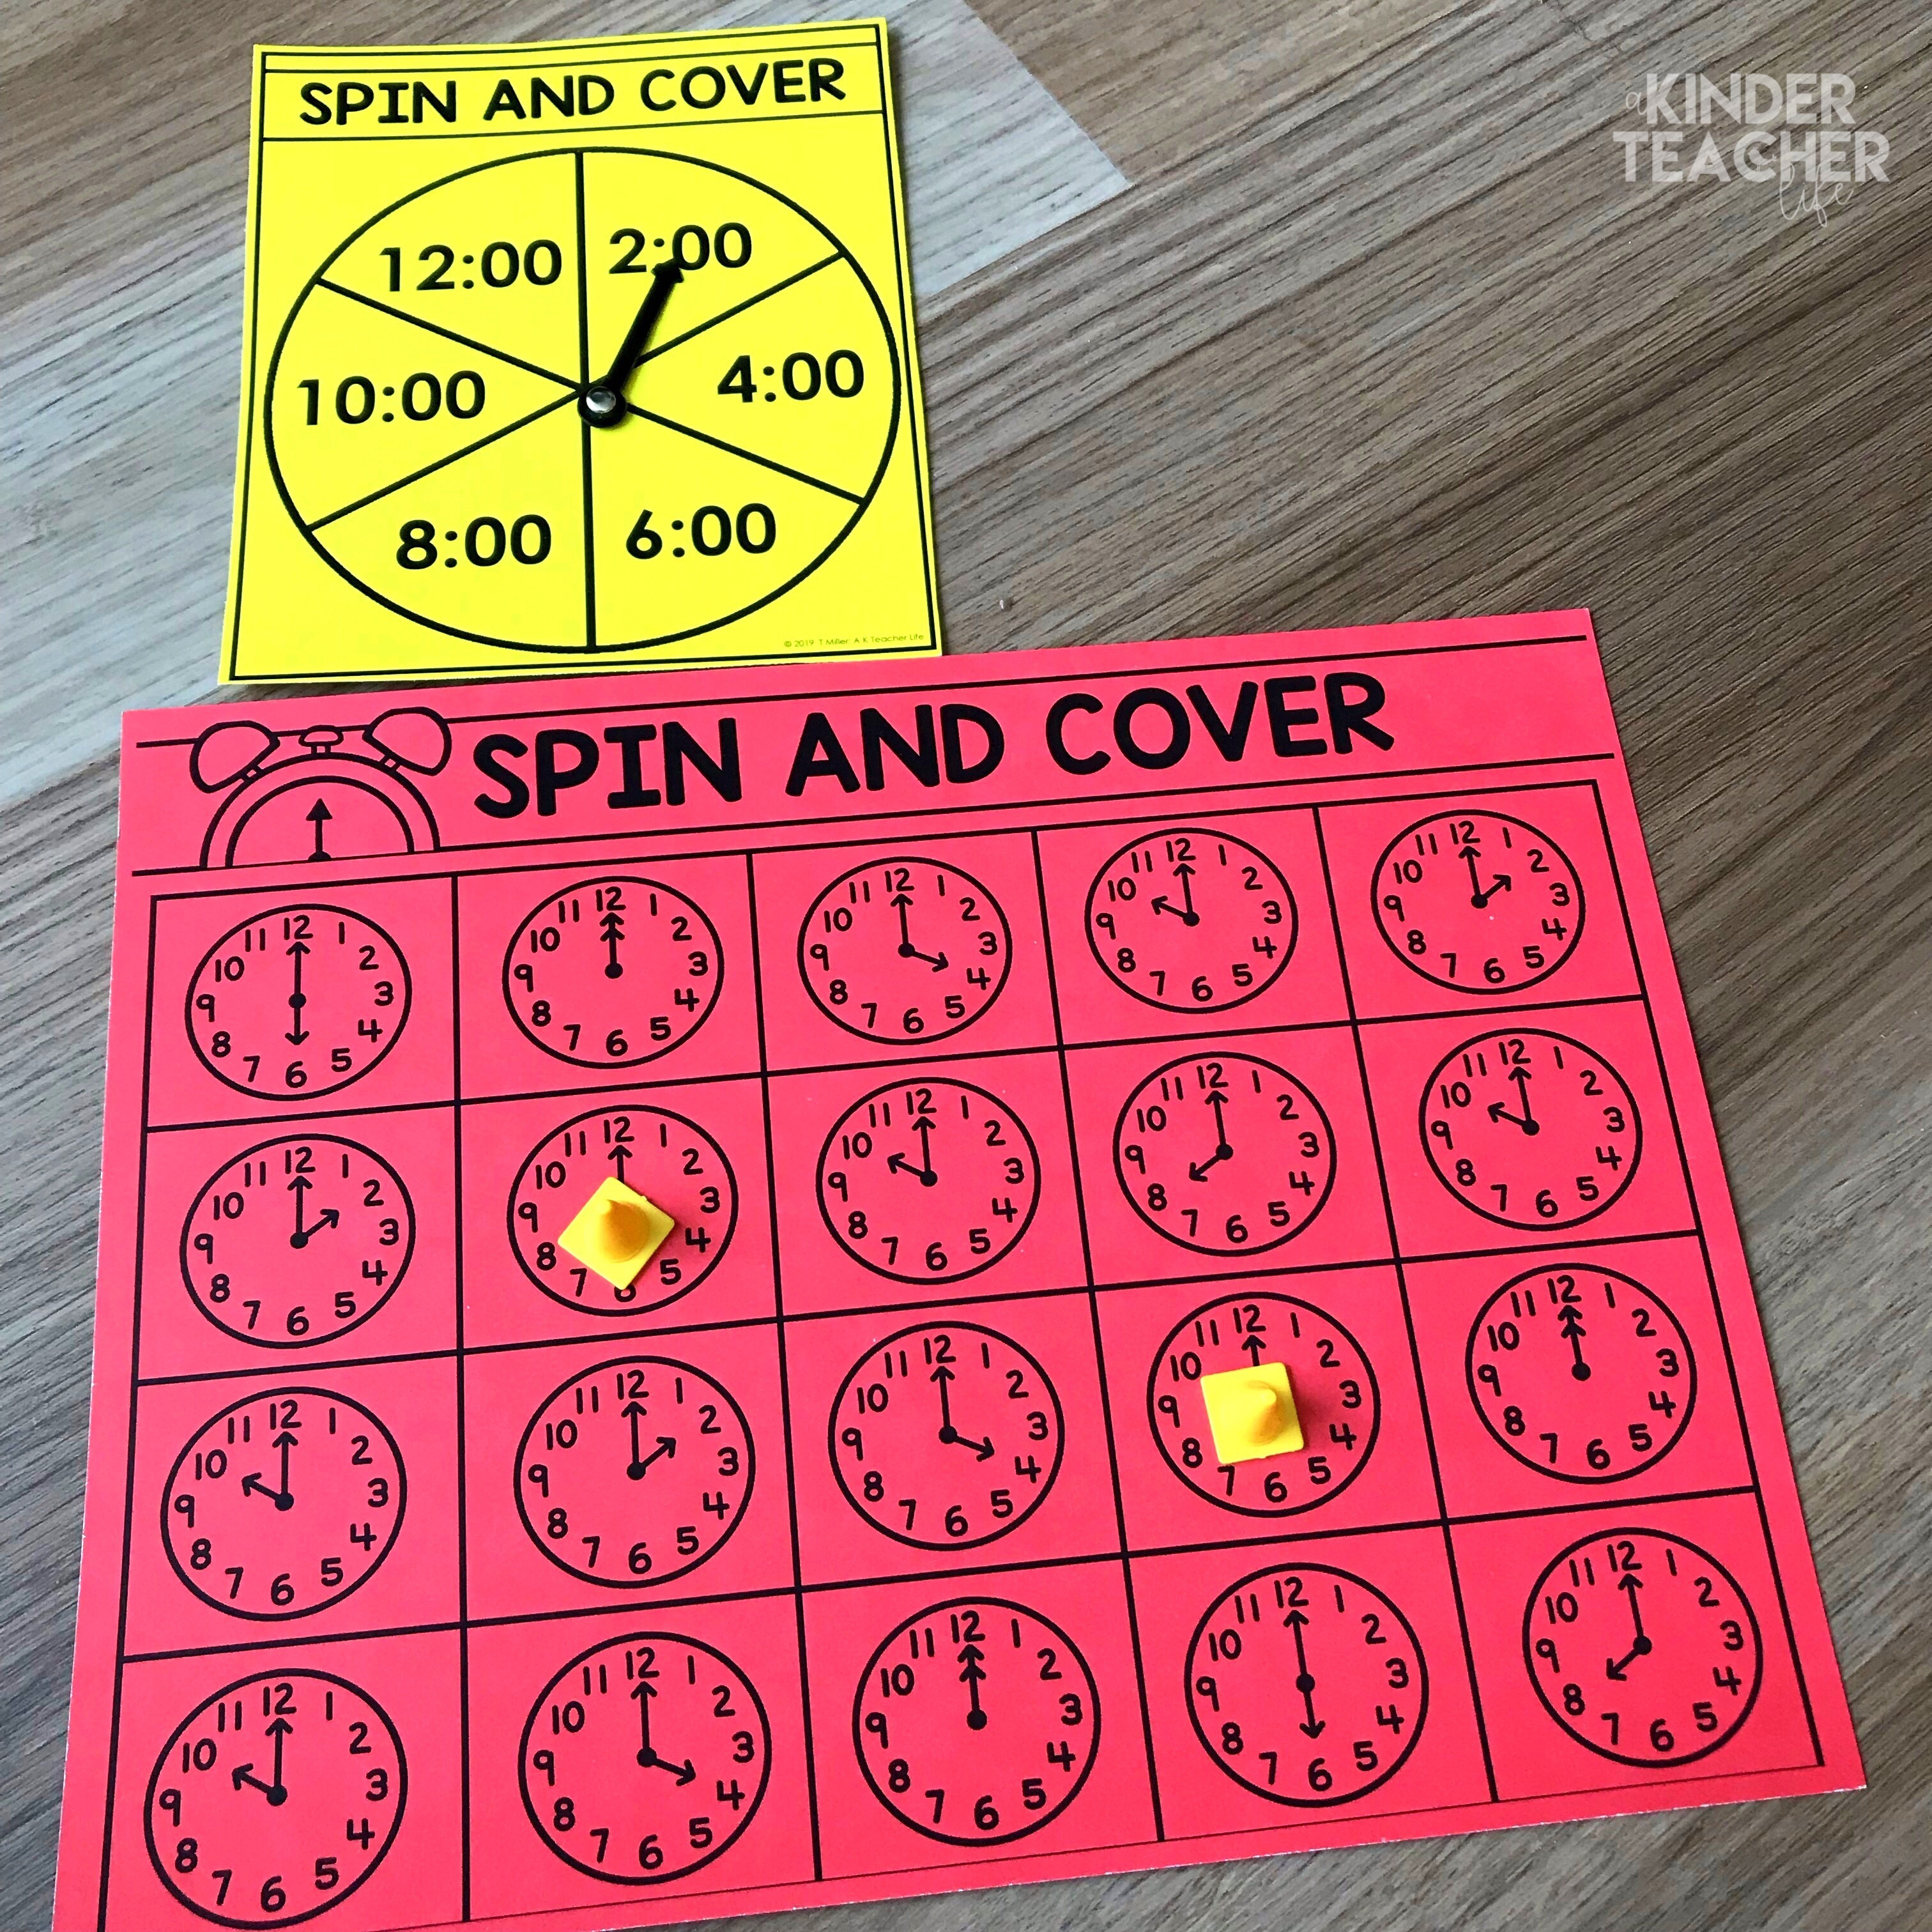 Spin and cover the time - Hands-on telling time math center activities for first grade students. 